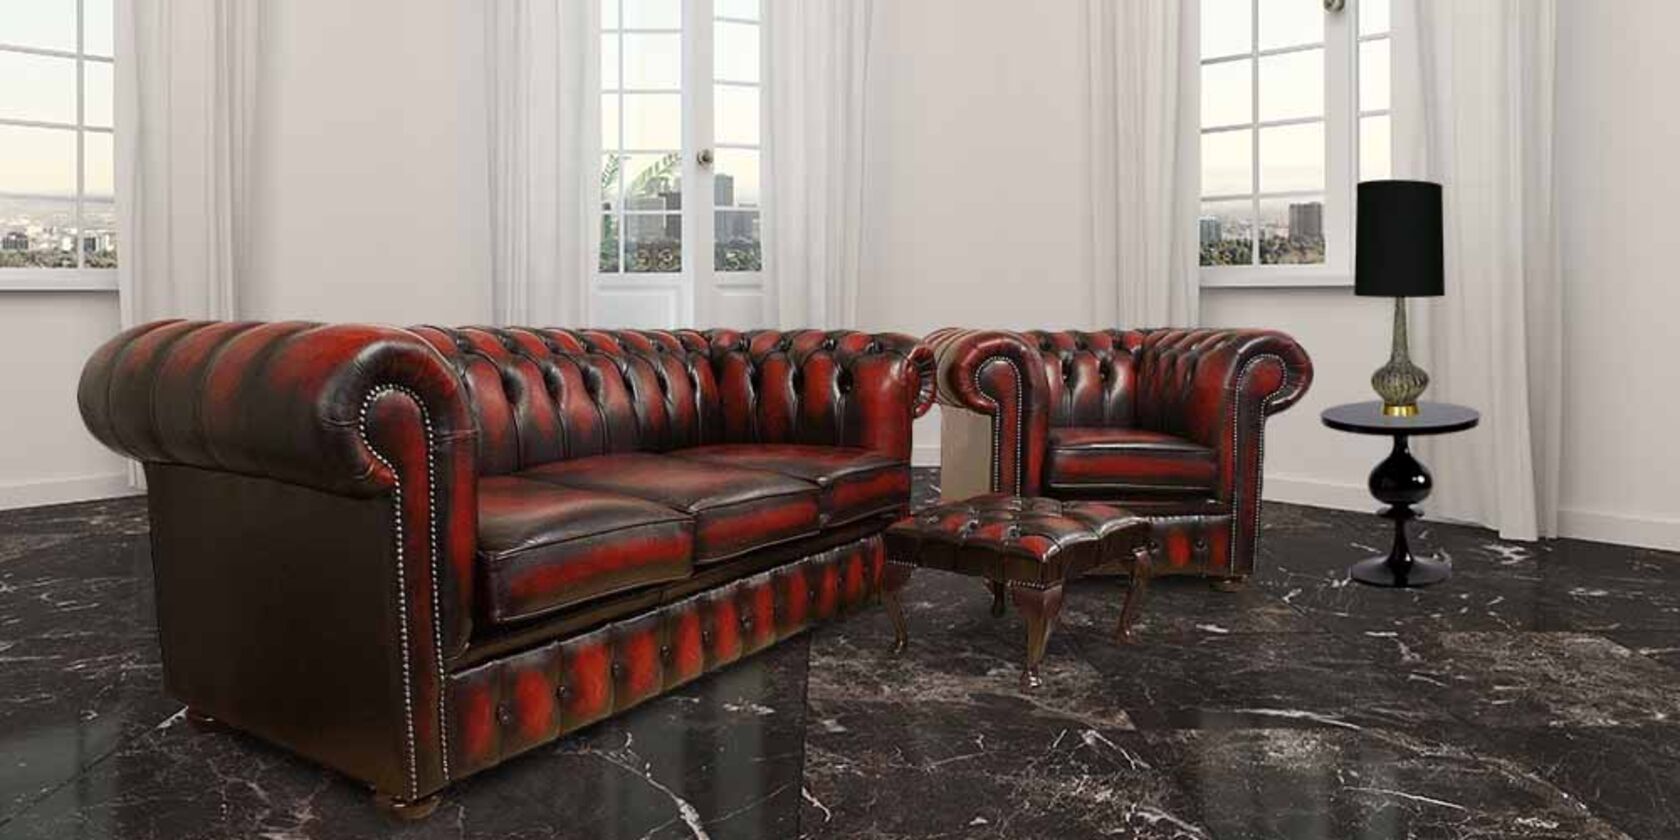 Footstool Real Antique Leather Suite Offer, Designer Sofas 4 You Reviews